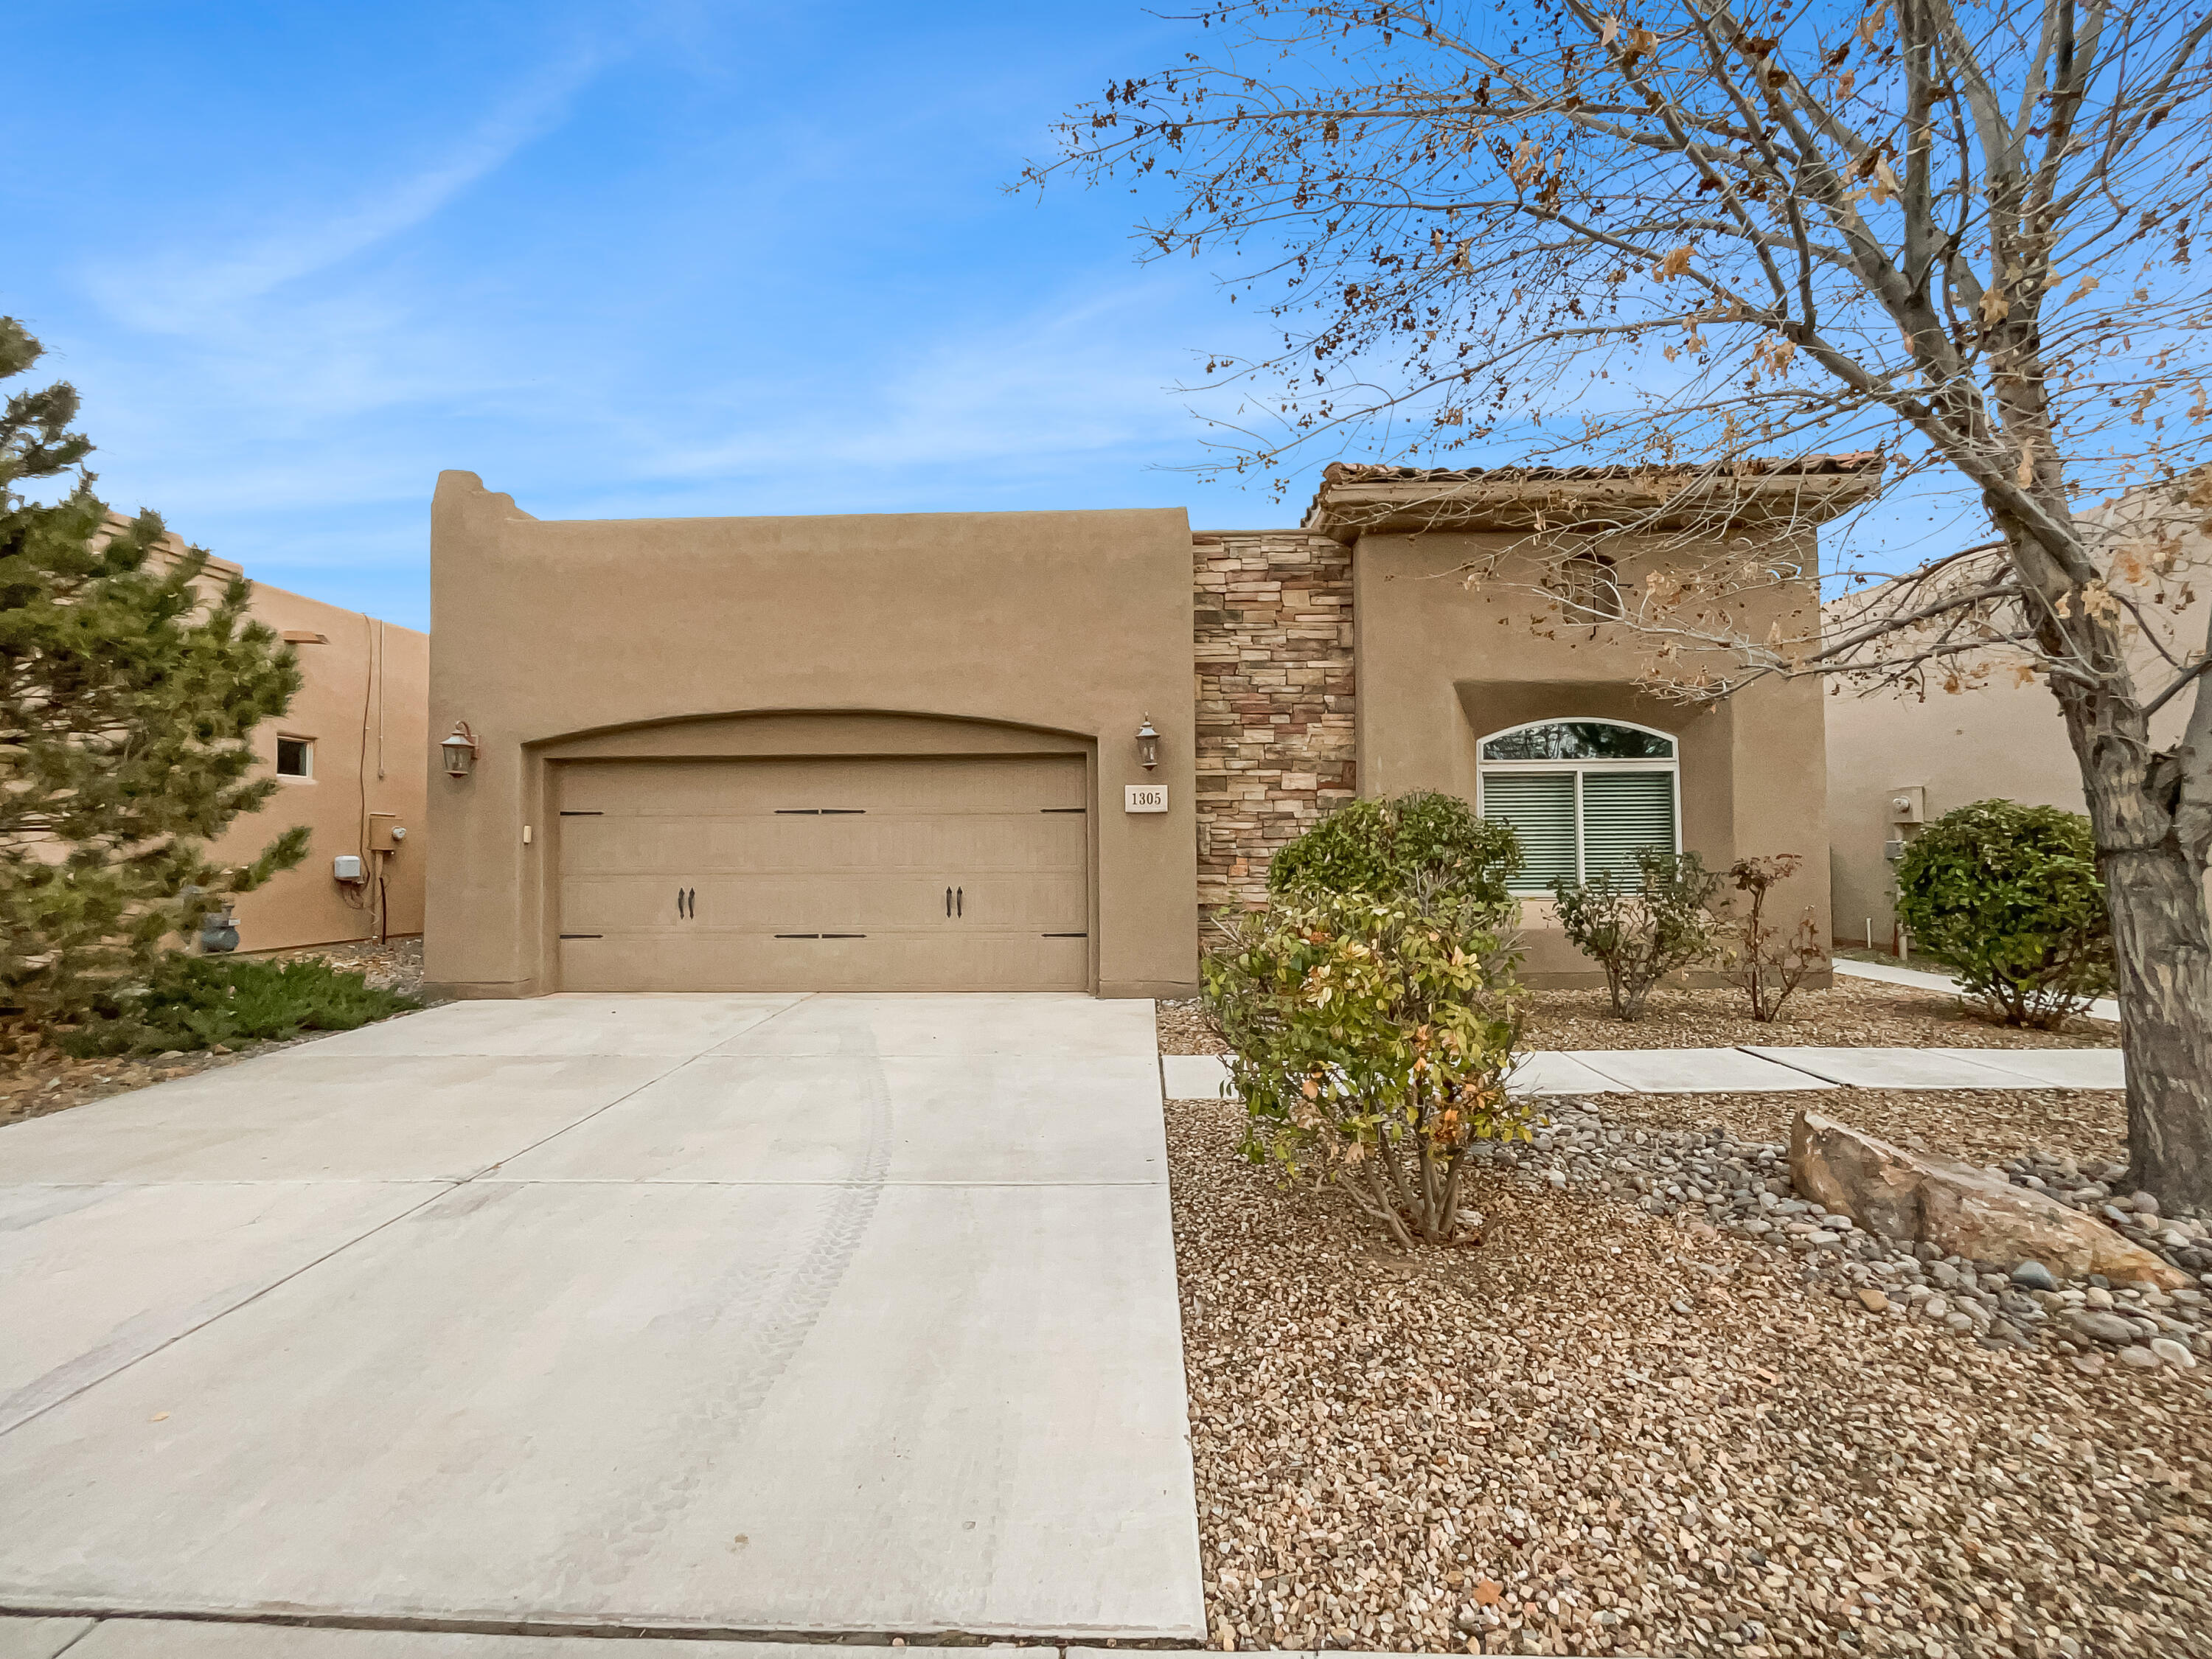 1305 Valle Lane NW, Albuquerque, New Mexico 87107, 3 Bedrooms Bedrooms, ,2 BathroomsBathrooms,Residential,For Sale,1305 Valle Lane NW,1054540